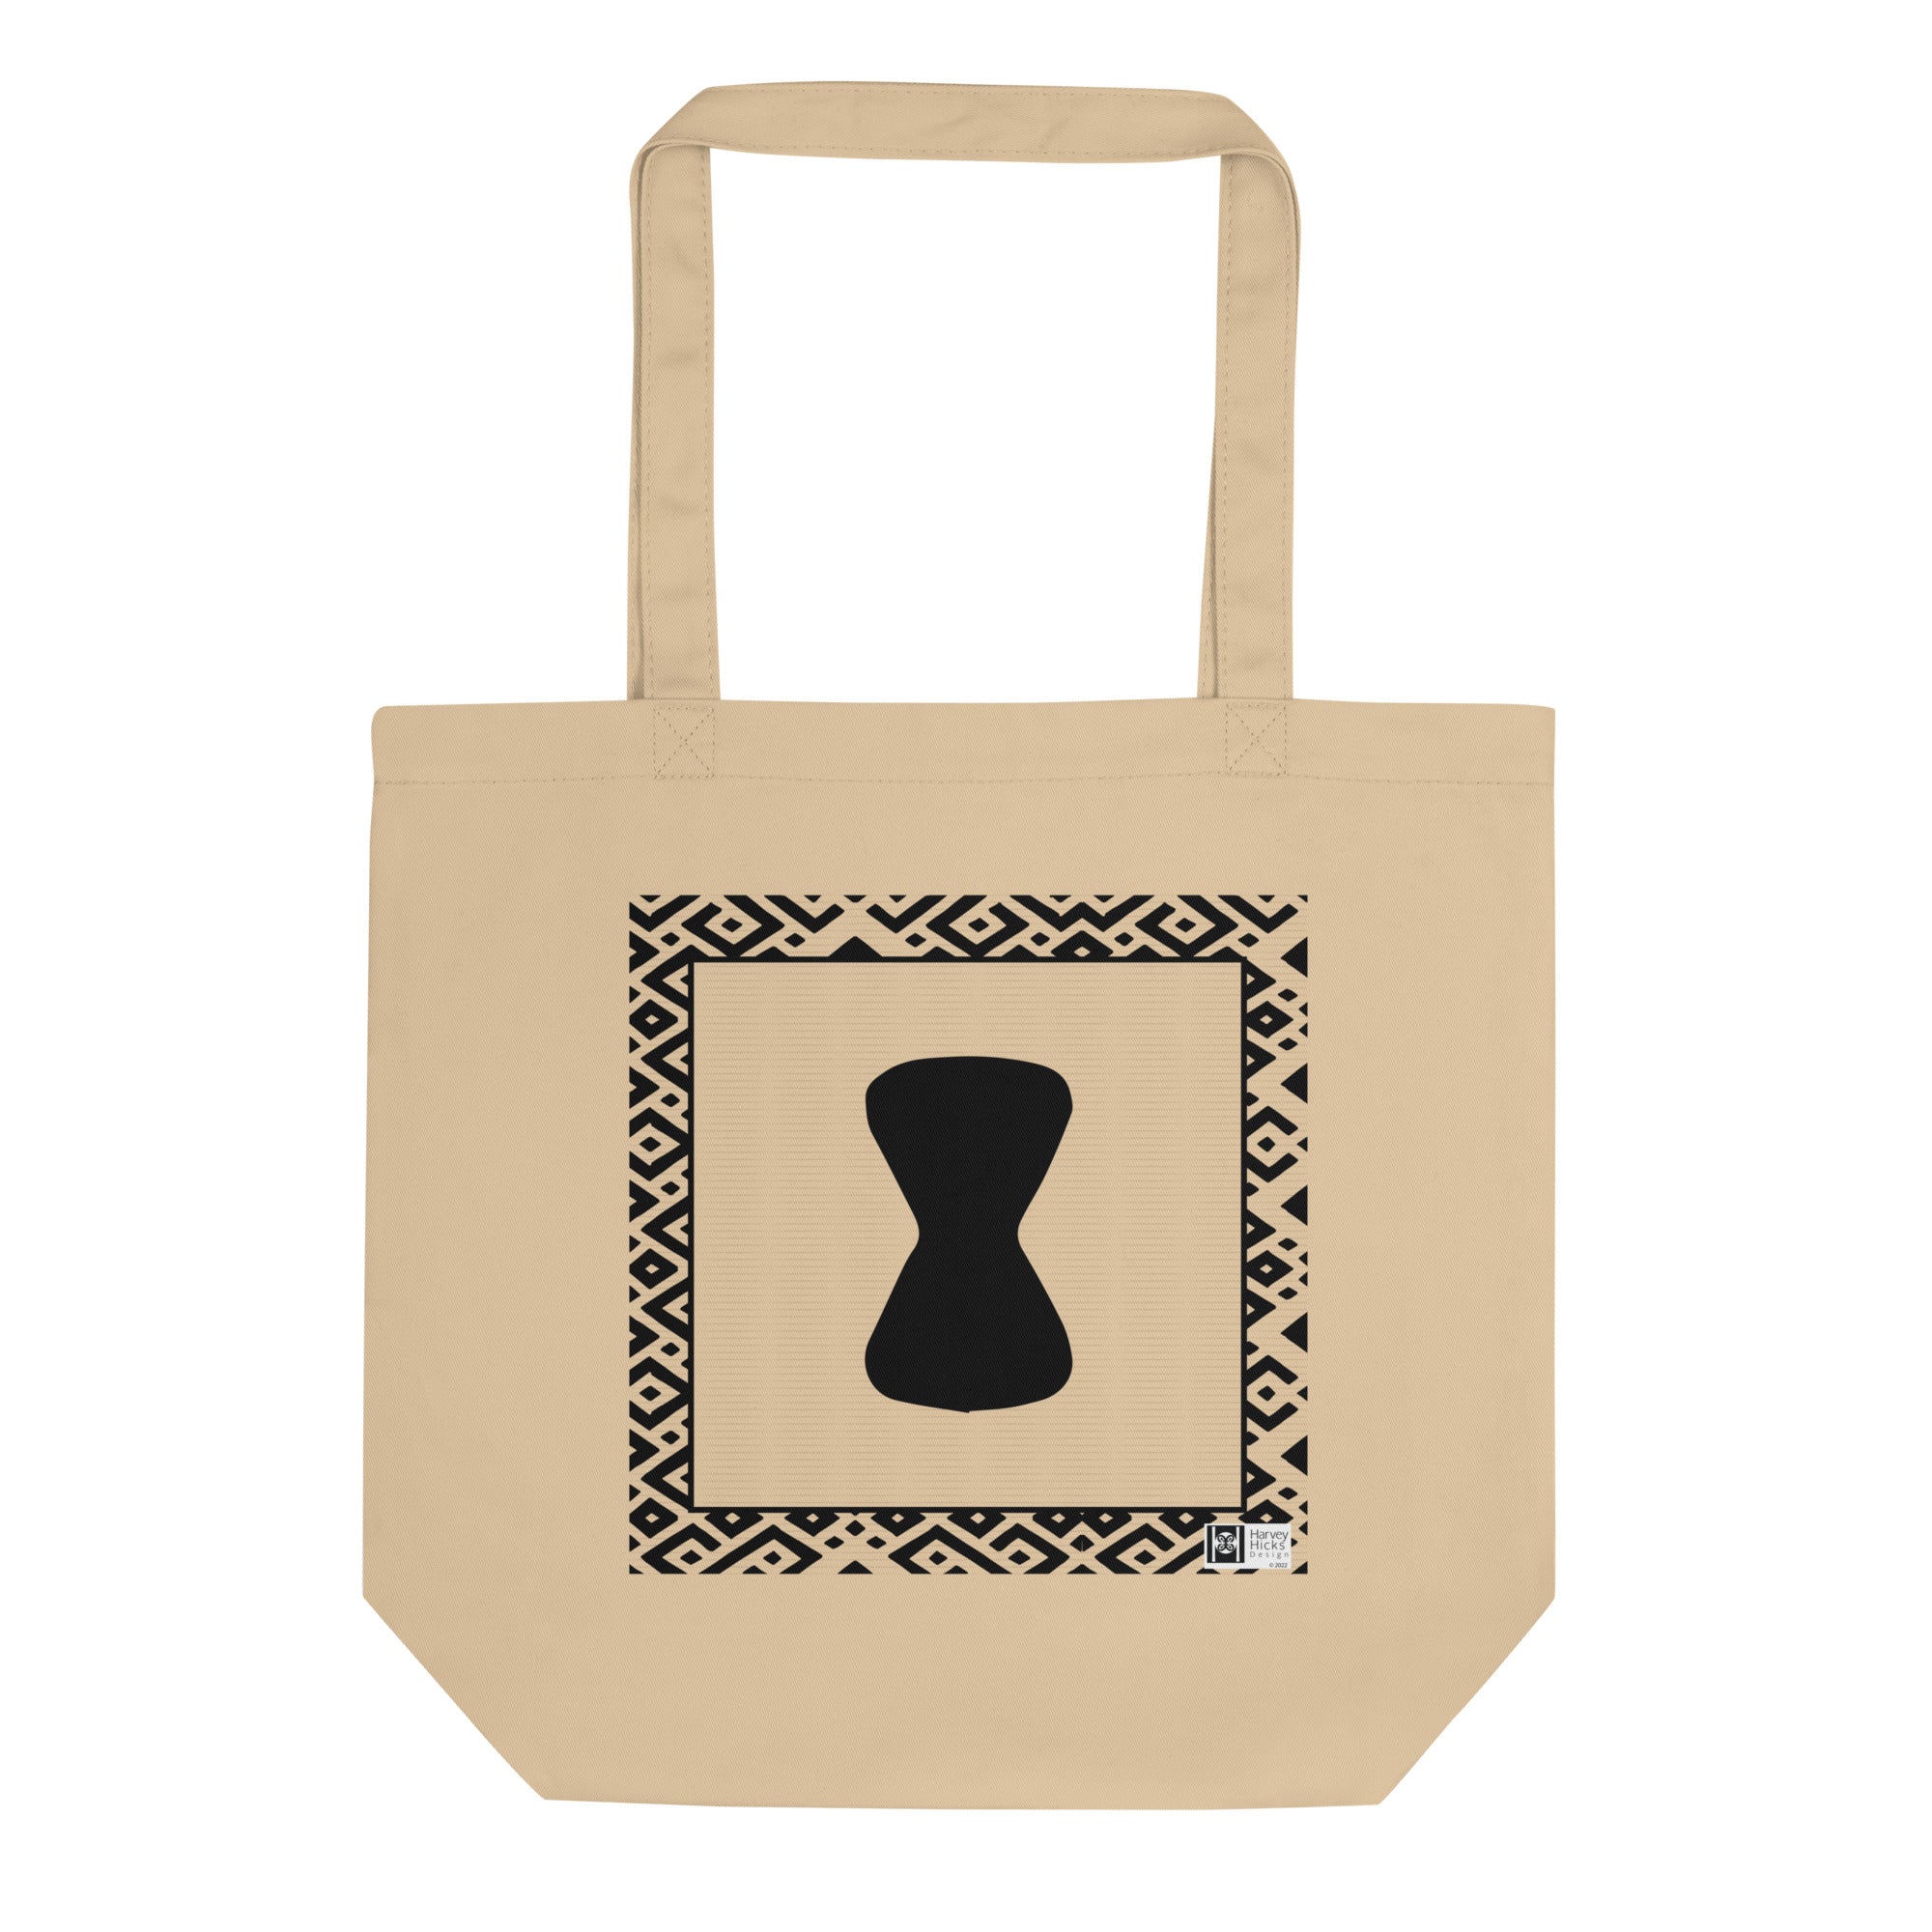 100% cotton Eco Tote Bag, featuring the Adinkra symbol for praise, NO TEXT